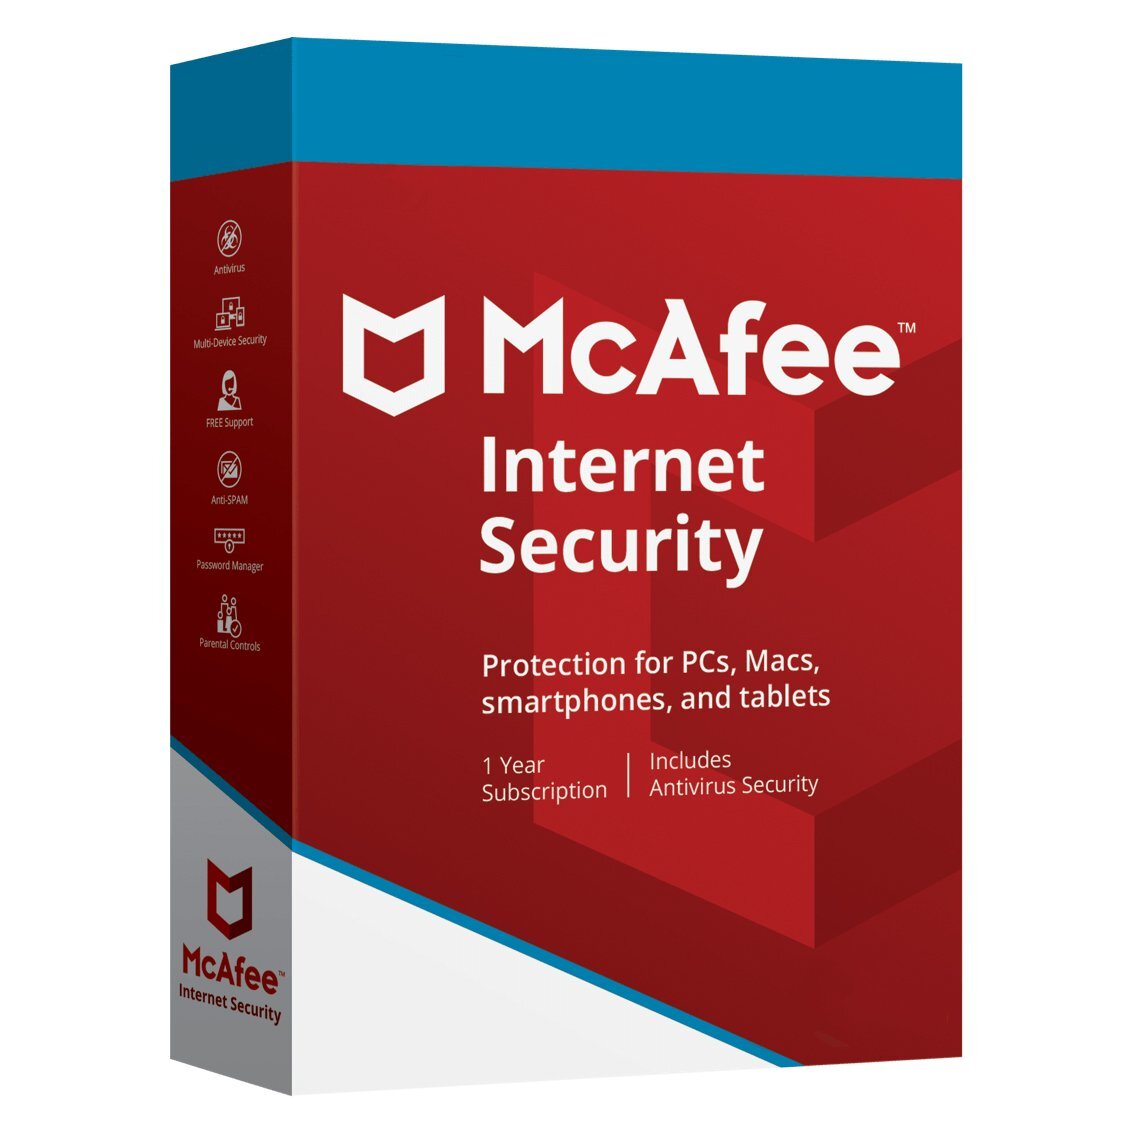 McAfee 2018 Total Protection 10 Devices PCMacAndroid download